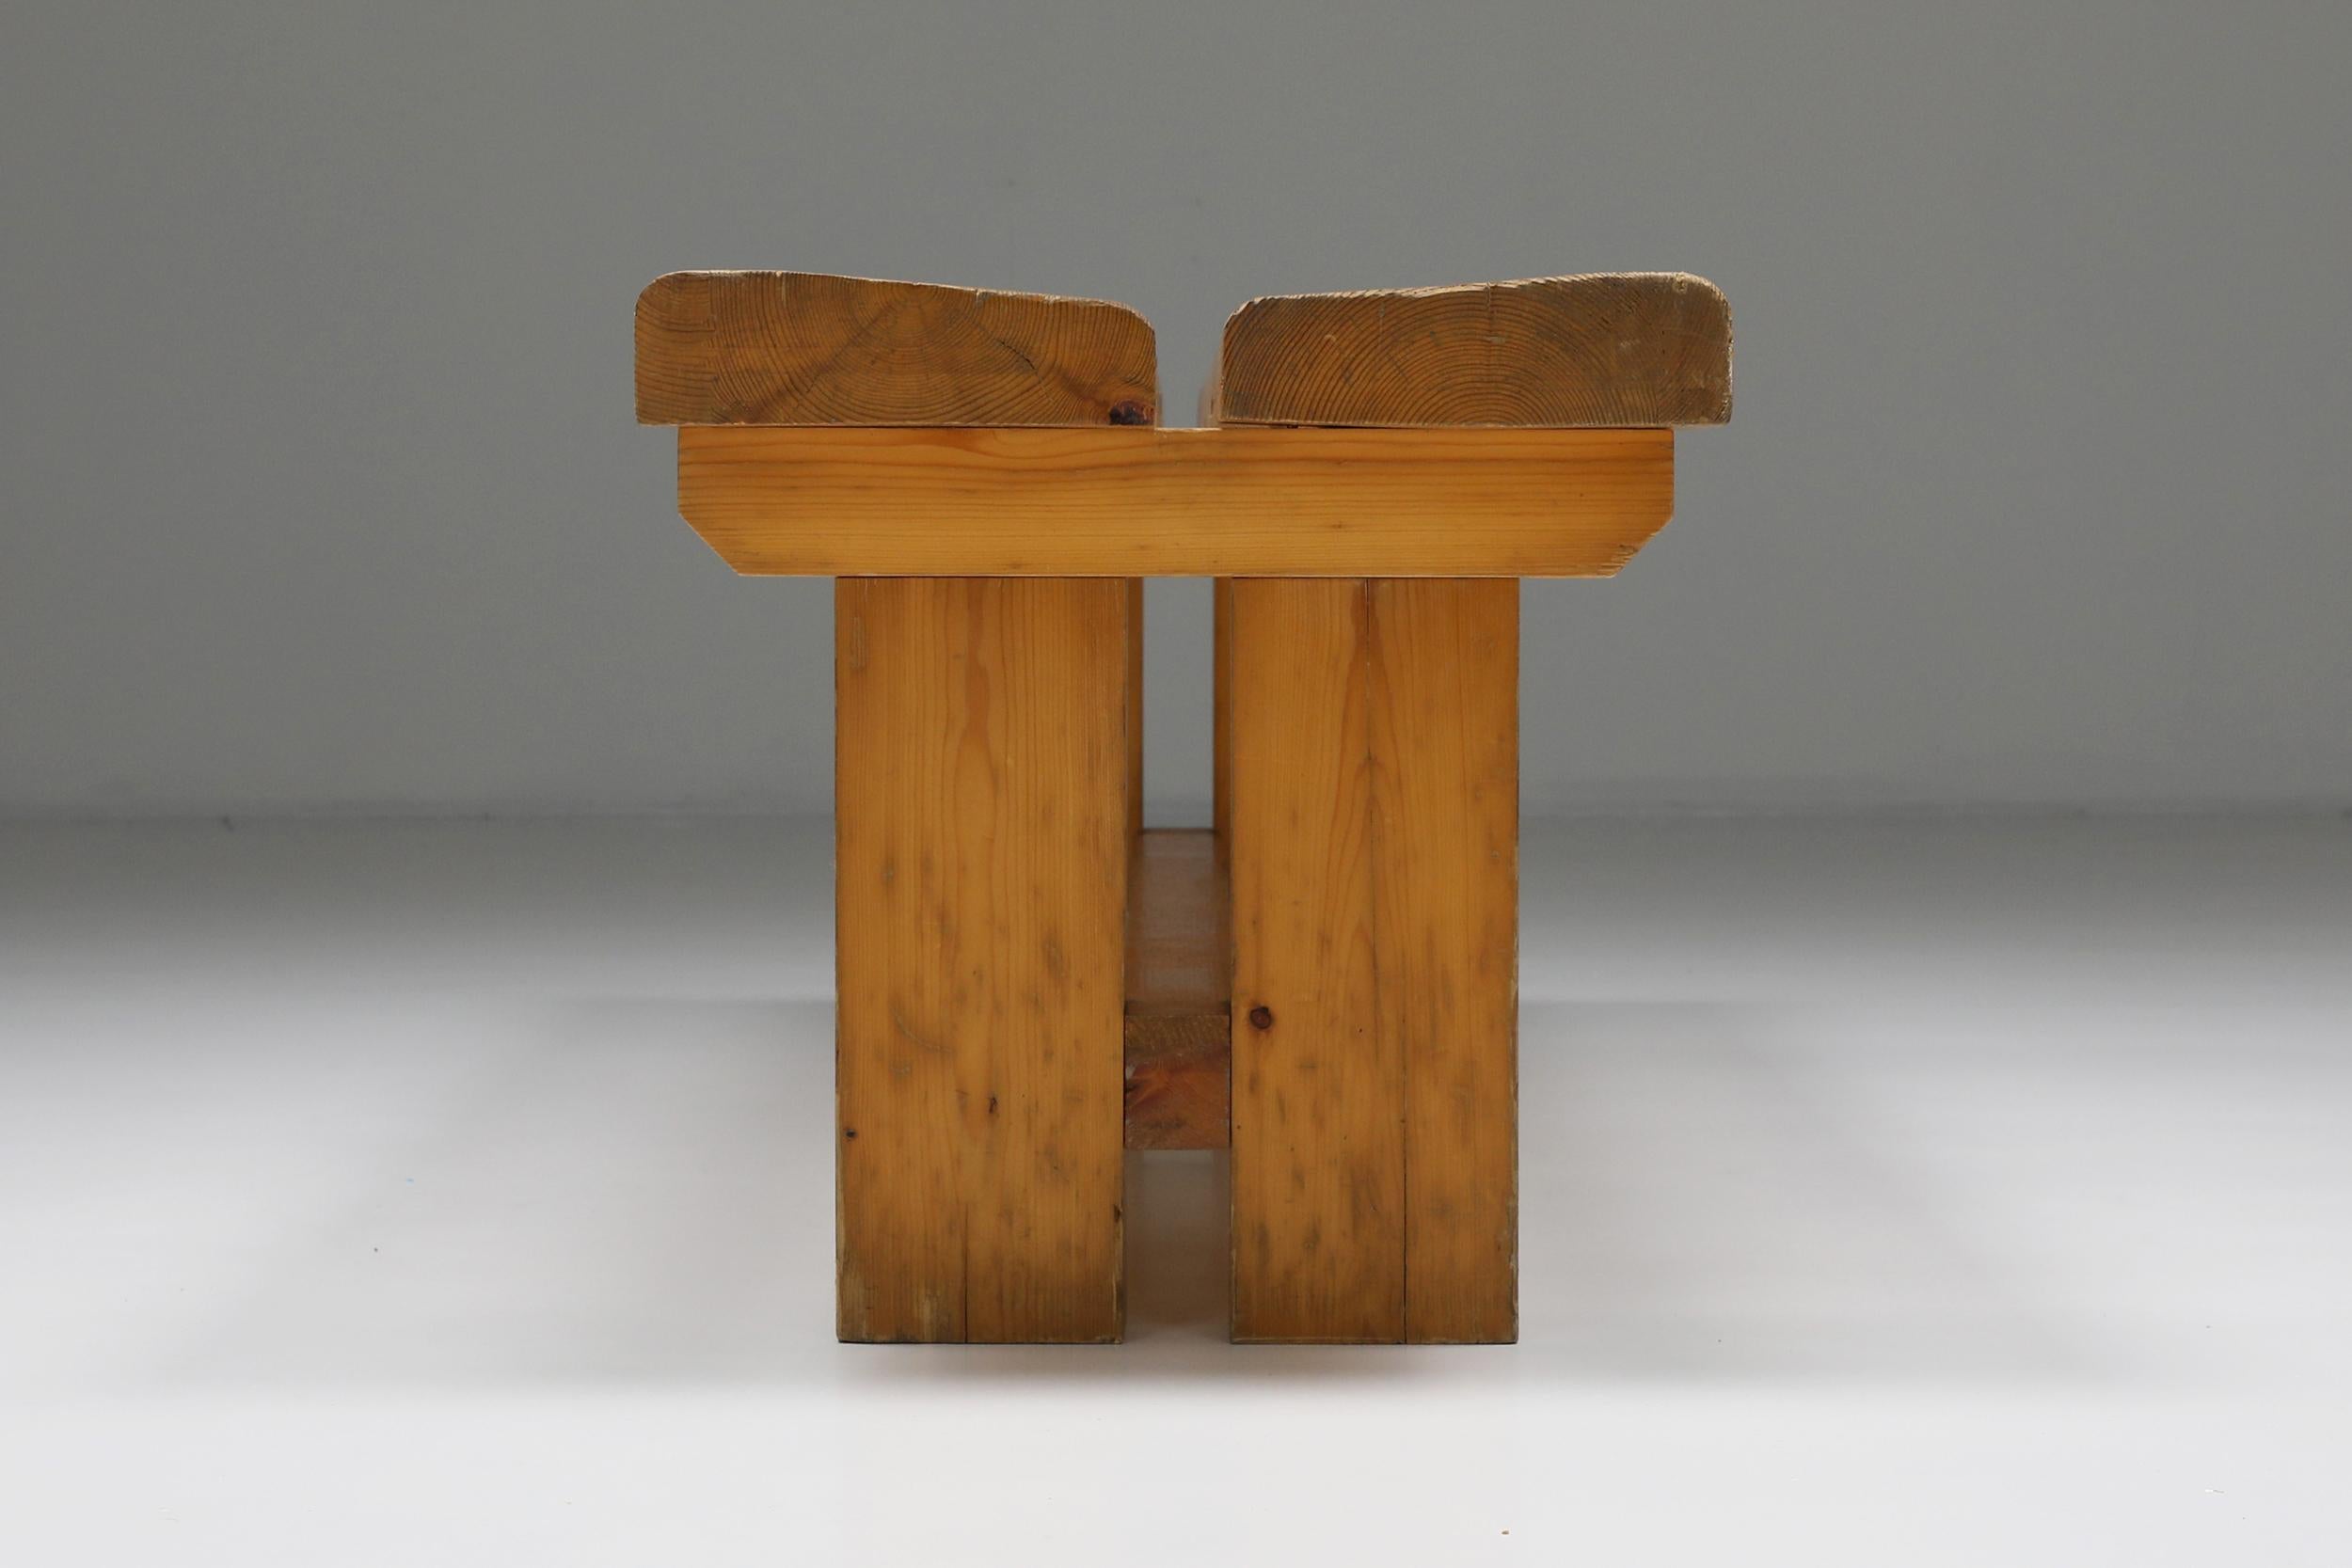 Pine Bench Les Arc by Charlotte Perriand, French Modernism, 1970s For Sale 2